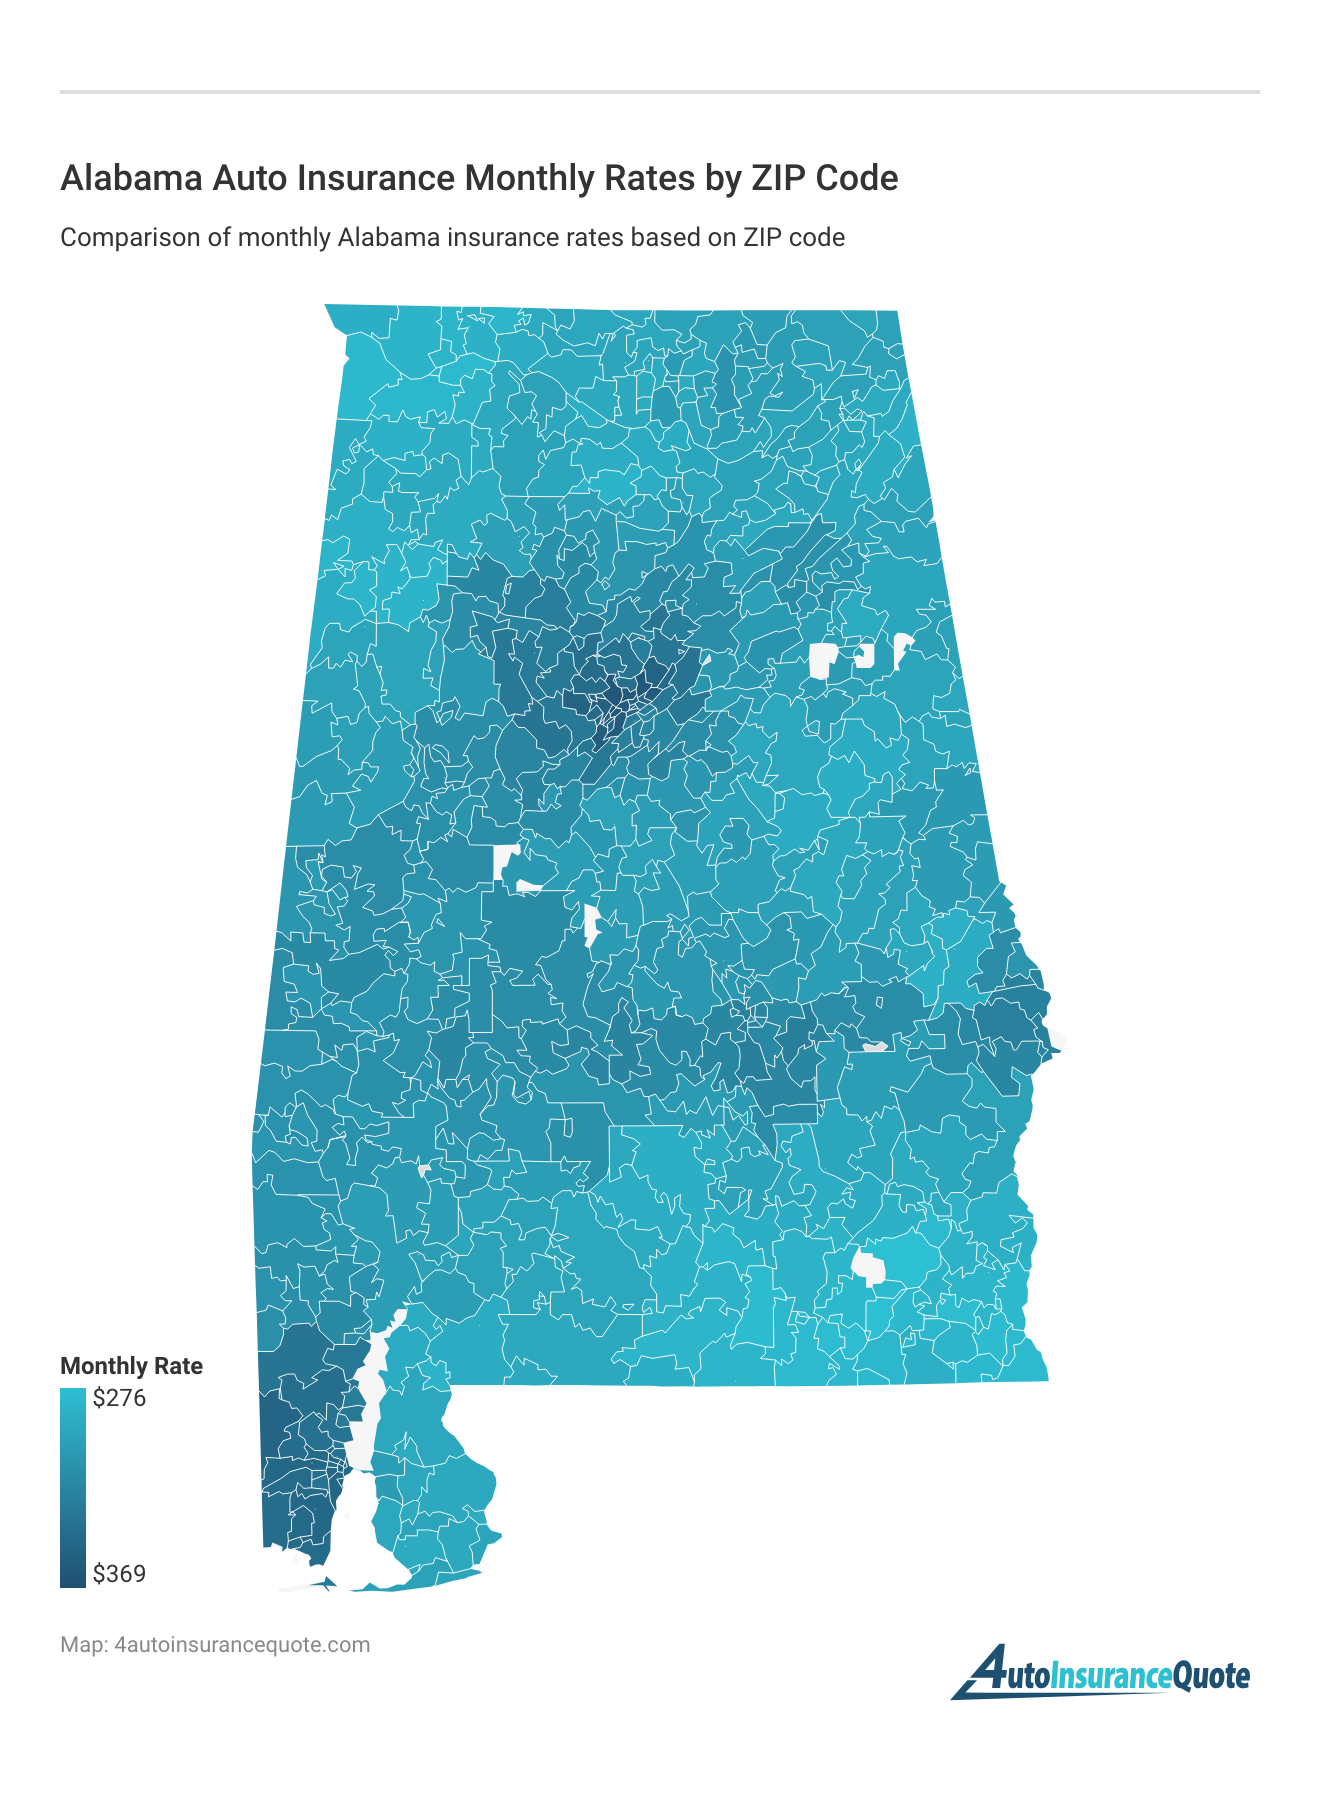 <h3>Alabama Auto Insurance Monthly Rates by ZIP Code</h3>